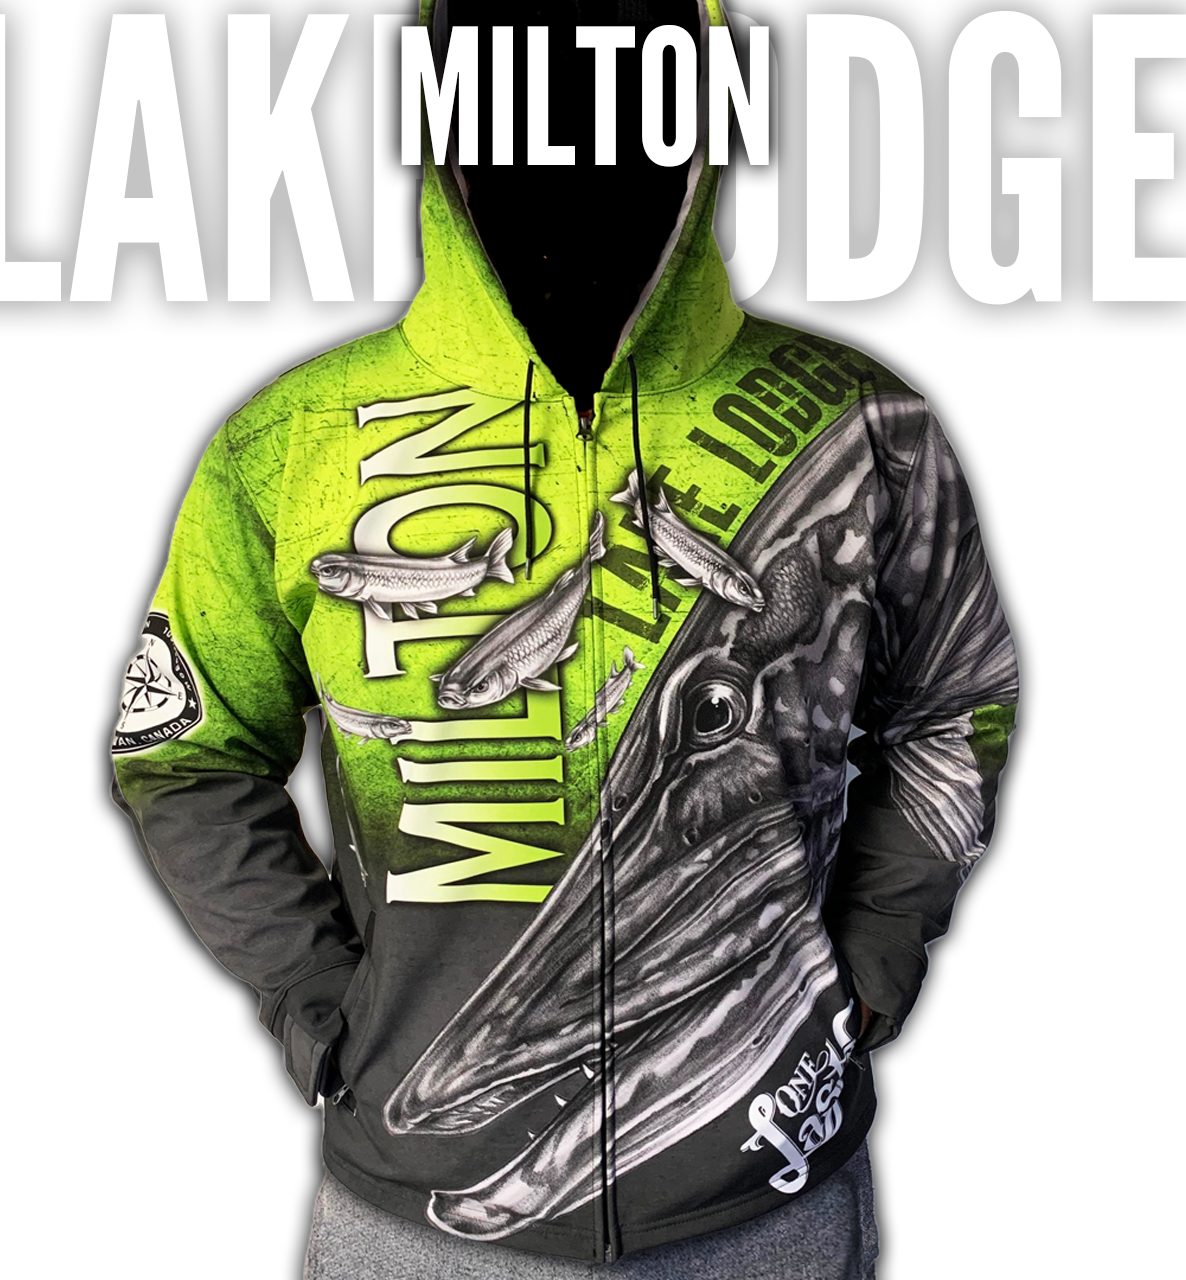 https://cdn11.bigcommerce.com/s-eemvl8dub3/images/stencil/1280x1280/products/299/1480/Green_Front_Jacket_copy__36180.1654056288.png?c=2?imbypass=on